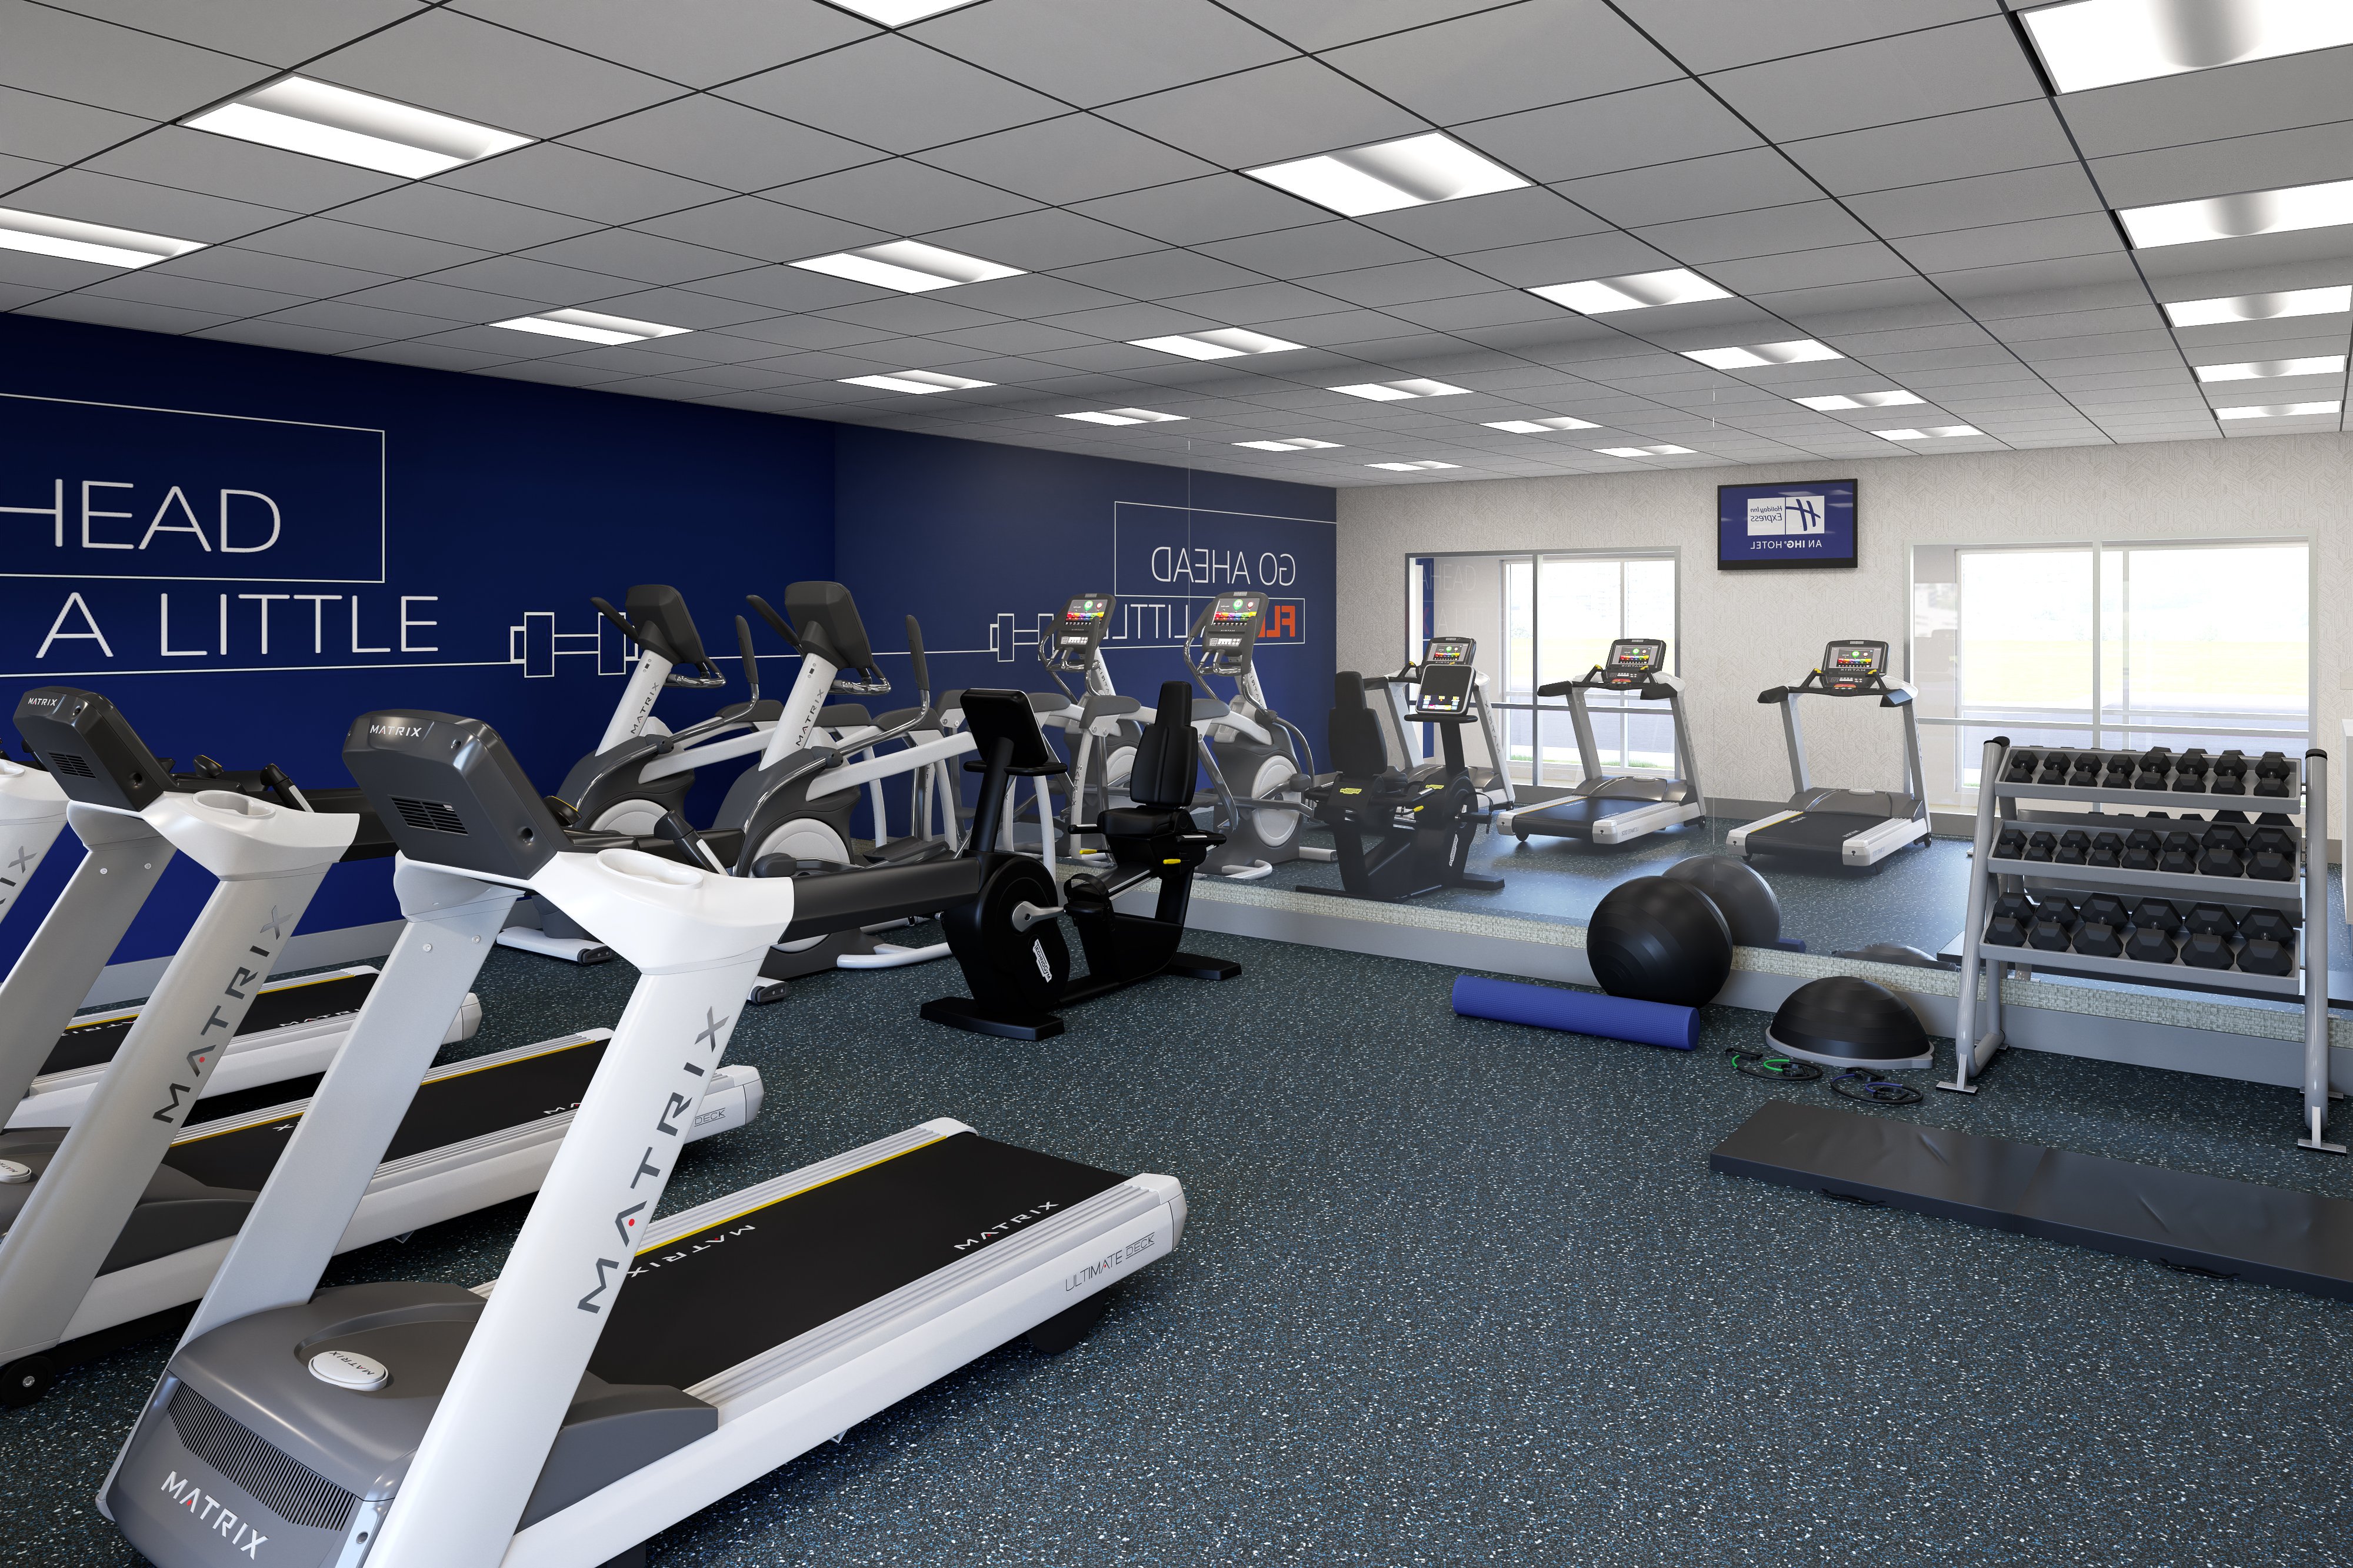 Keep up your daily workout in our Fitness Center